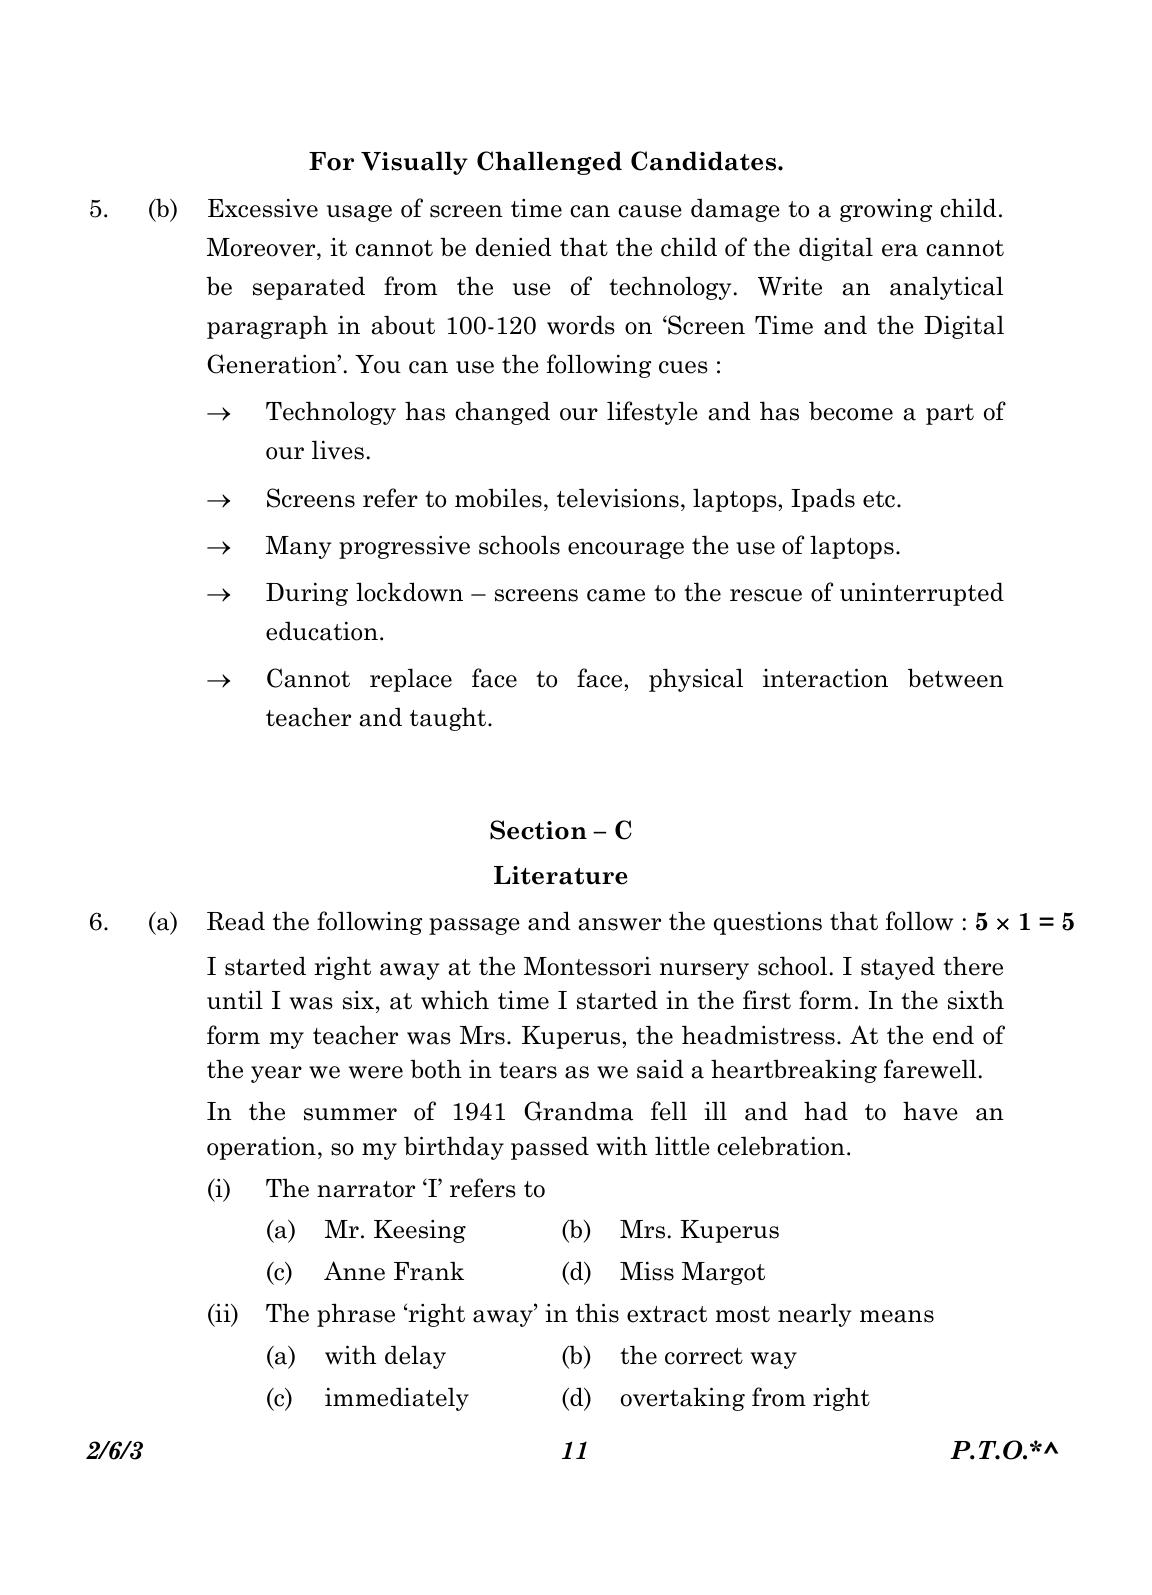 CBSE Class 10 2-6-3_English Language And Literature 2023 Question Paper - Page 11